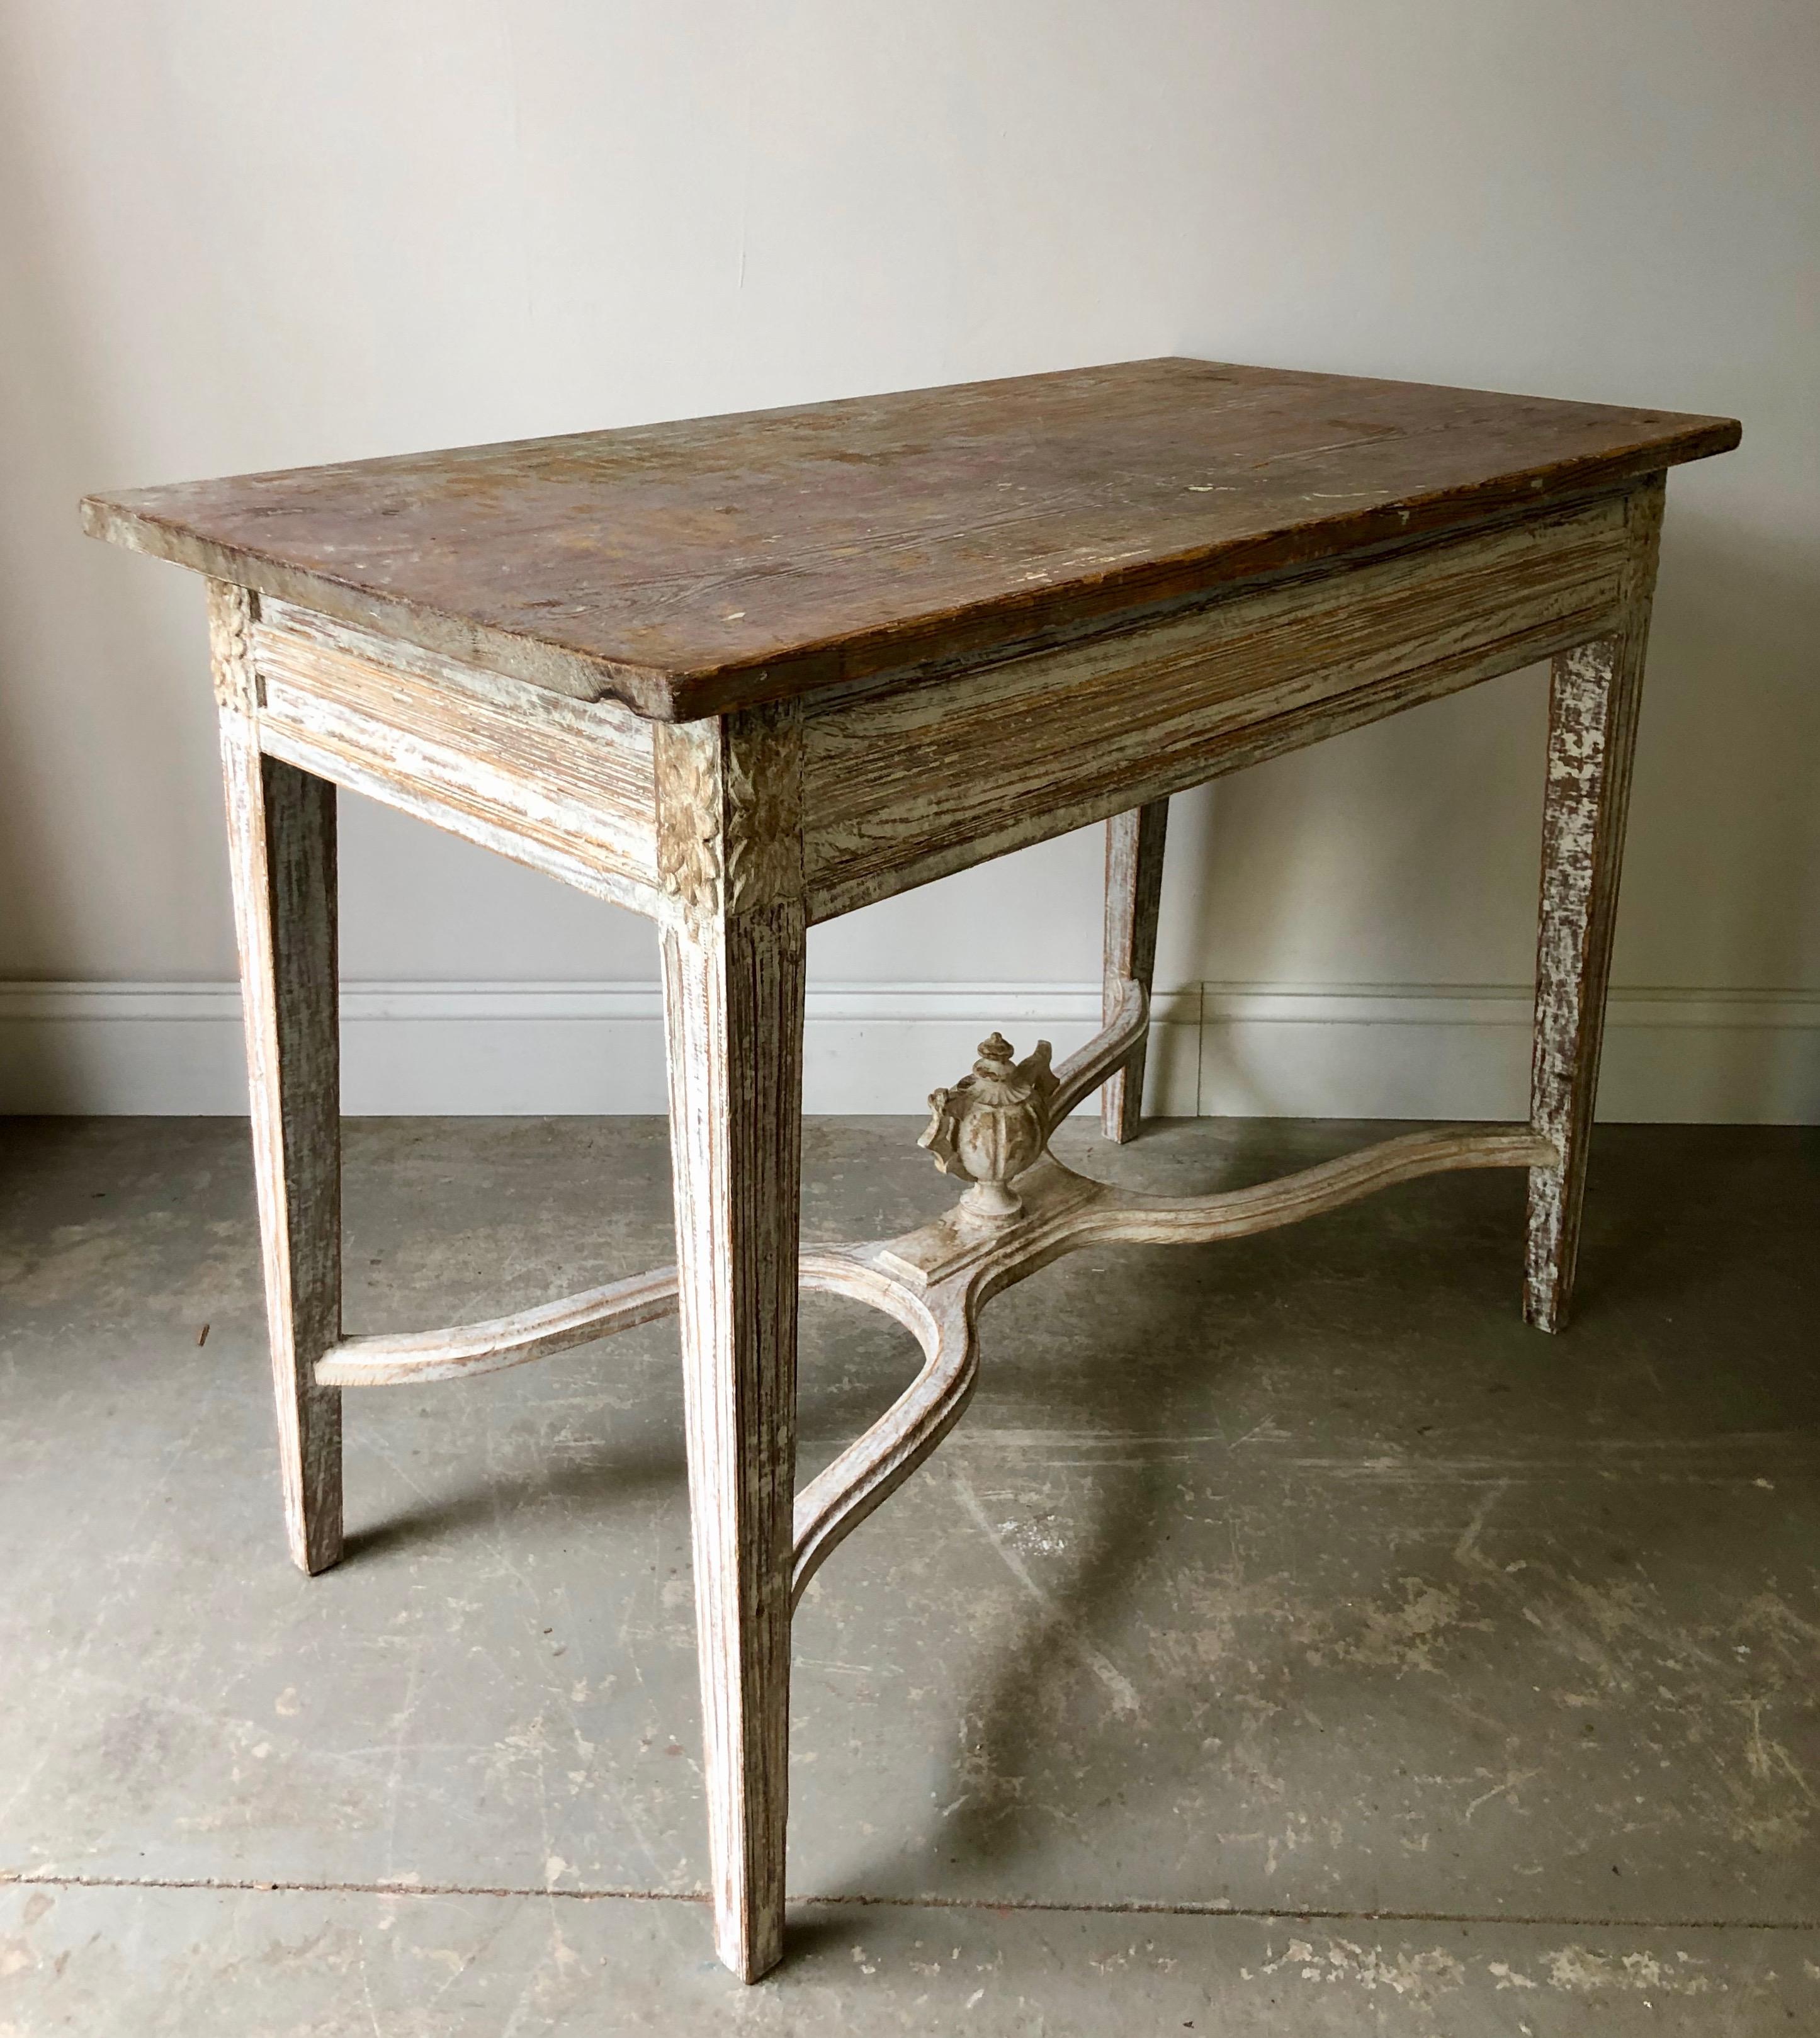 Swedish Gustavian style freestanding table with carved apron, tapering carved legs and saltire stretcher with grand central medallion in worn patina with darker wooden top.
Sweden, circa 1860.
Here are few examples surprising pieces and objects,